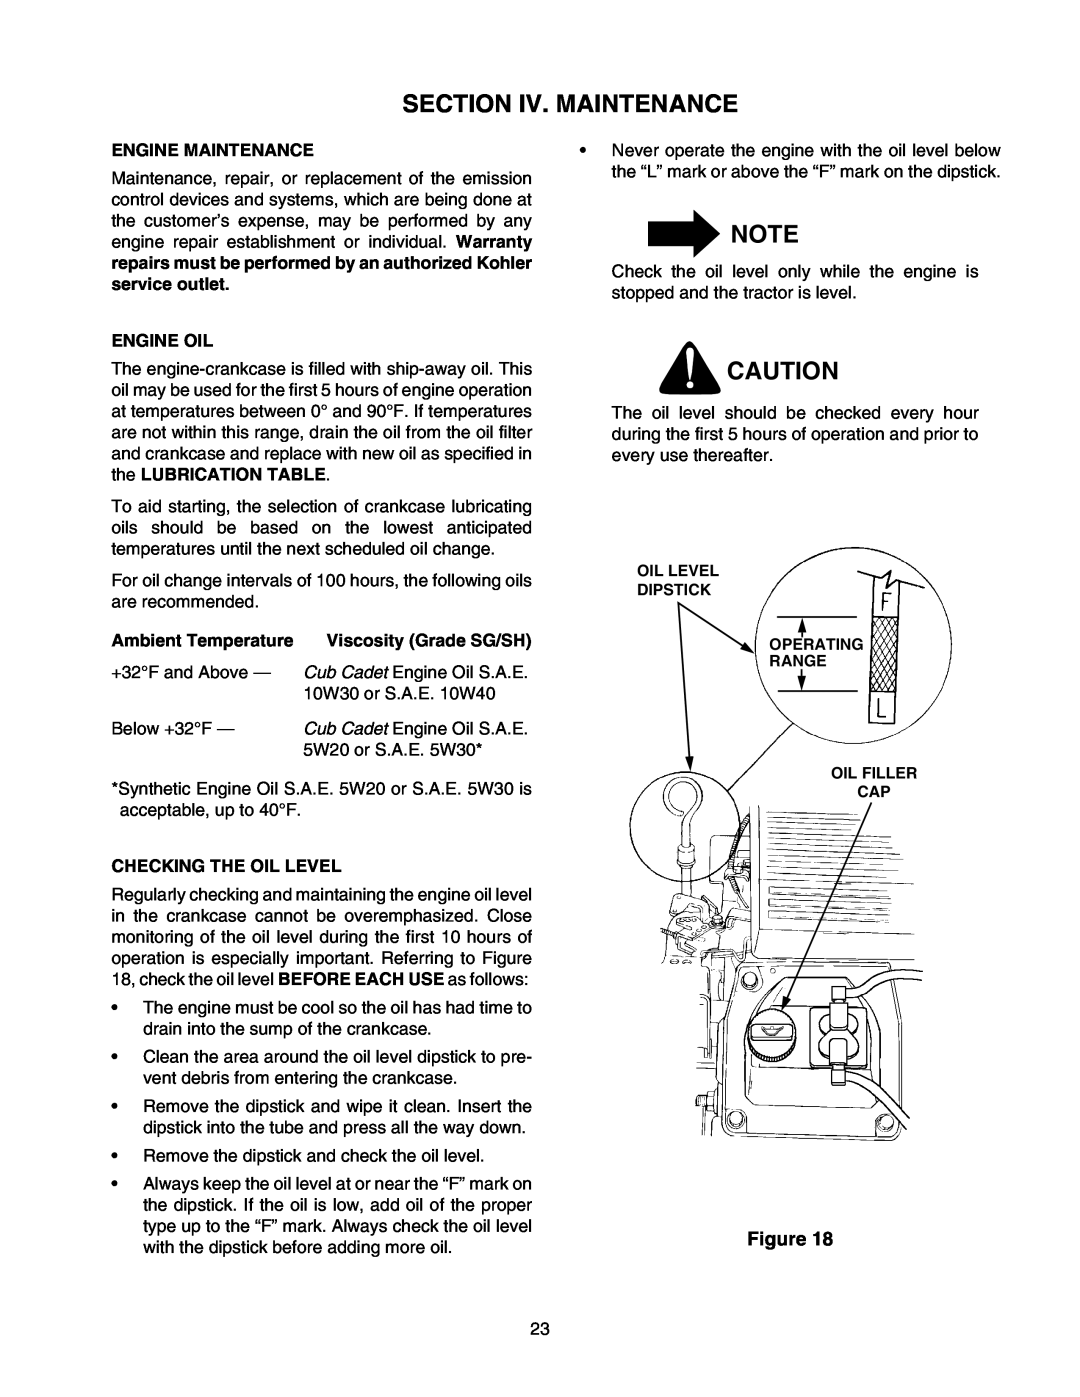 Cub Cadet 2176 Section Iv. Maintenance, Engine Maintenance, repairs must be performed by an authorized Kohler, Engine Oil 